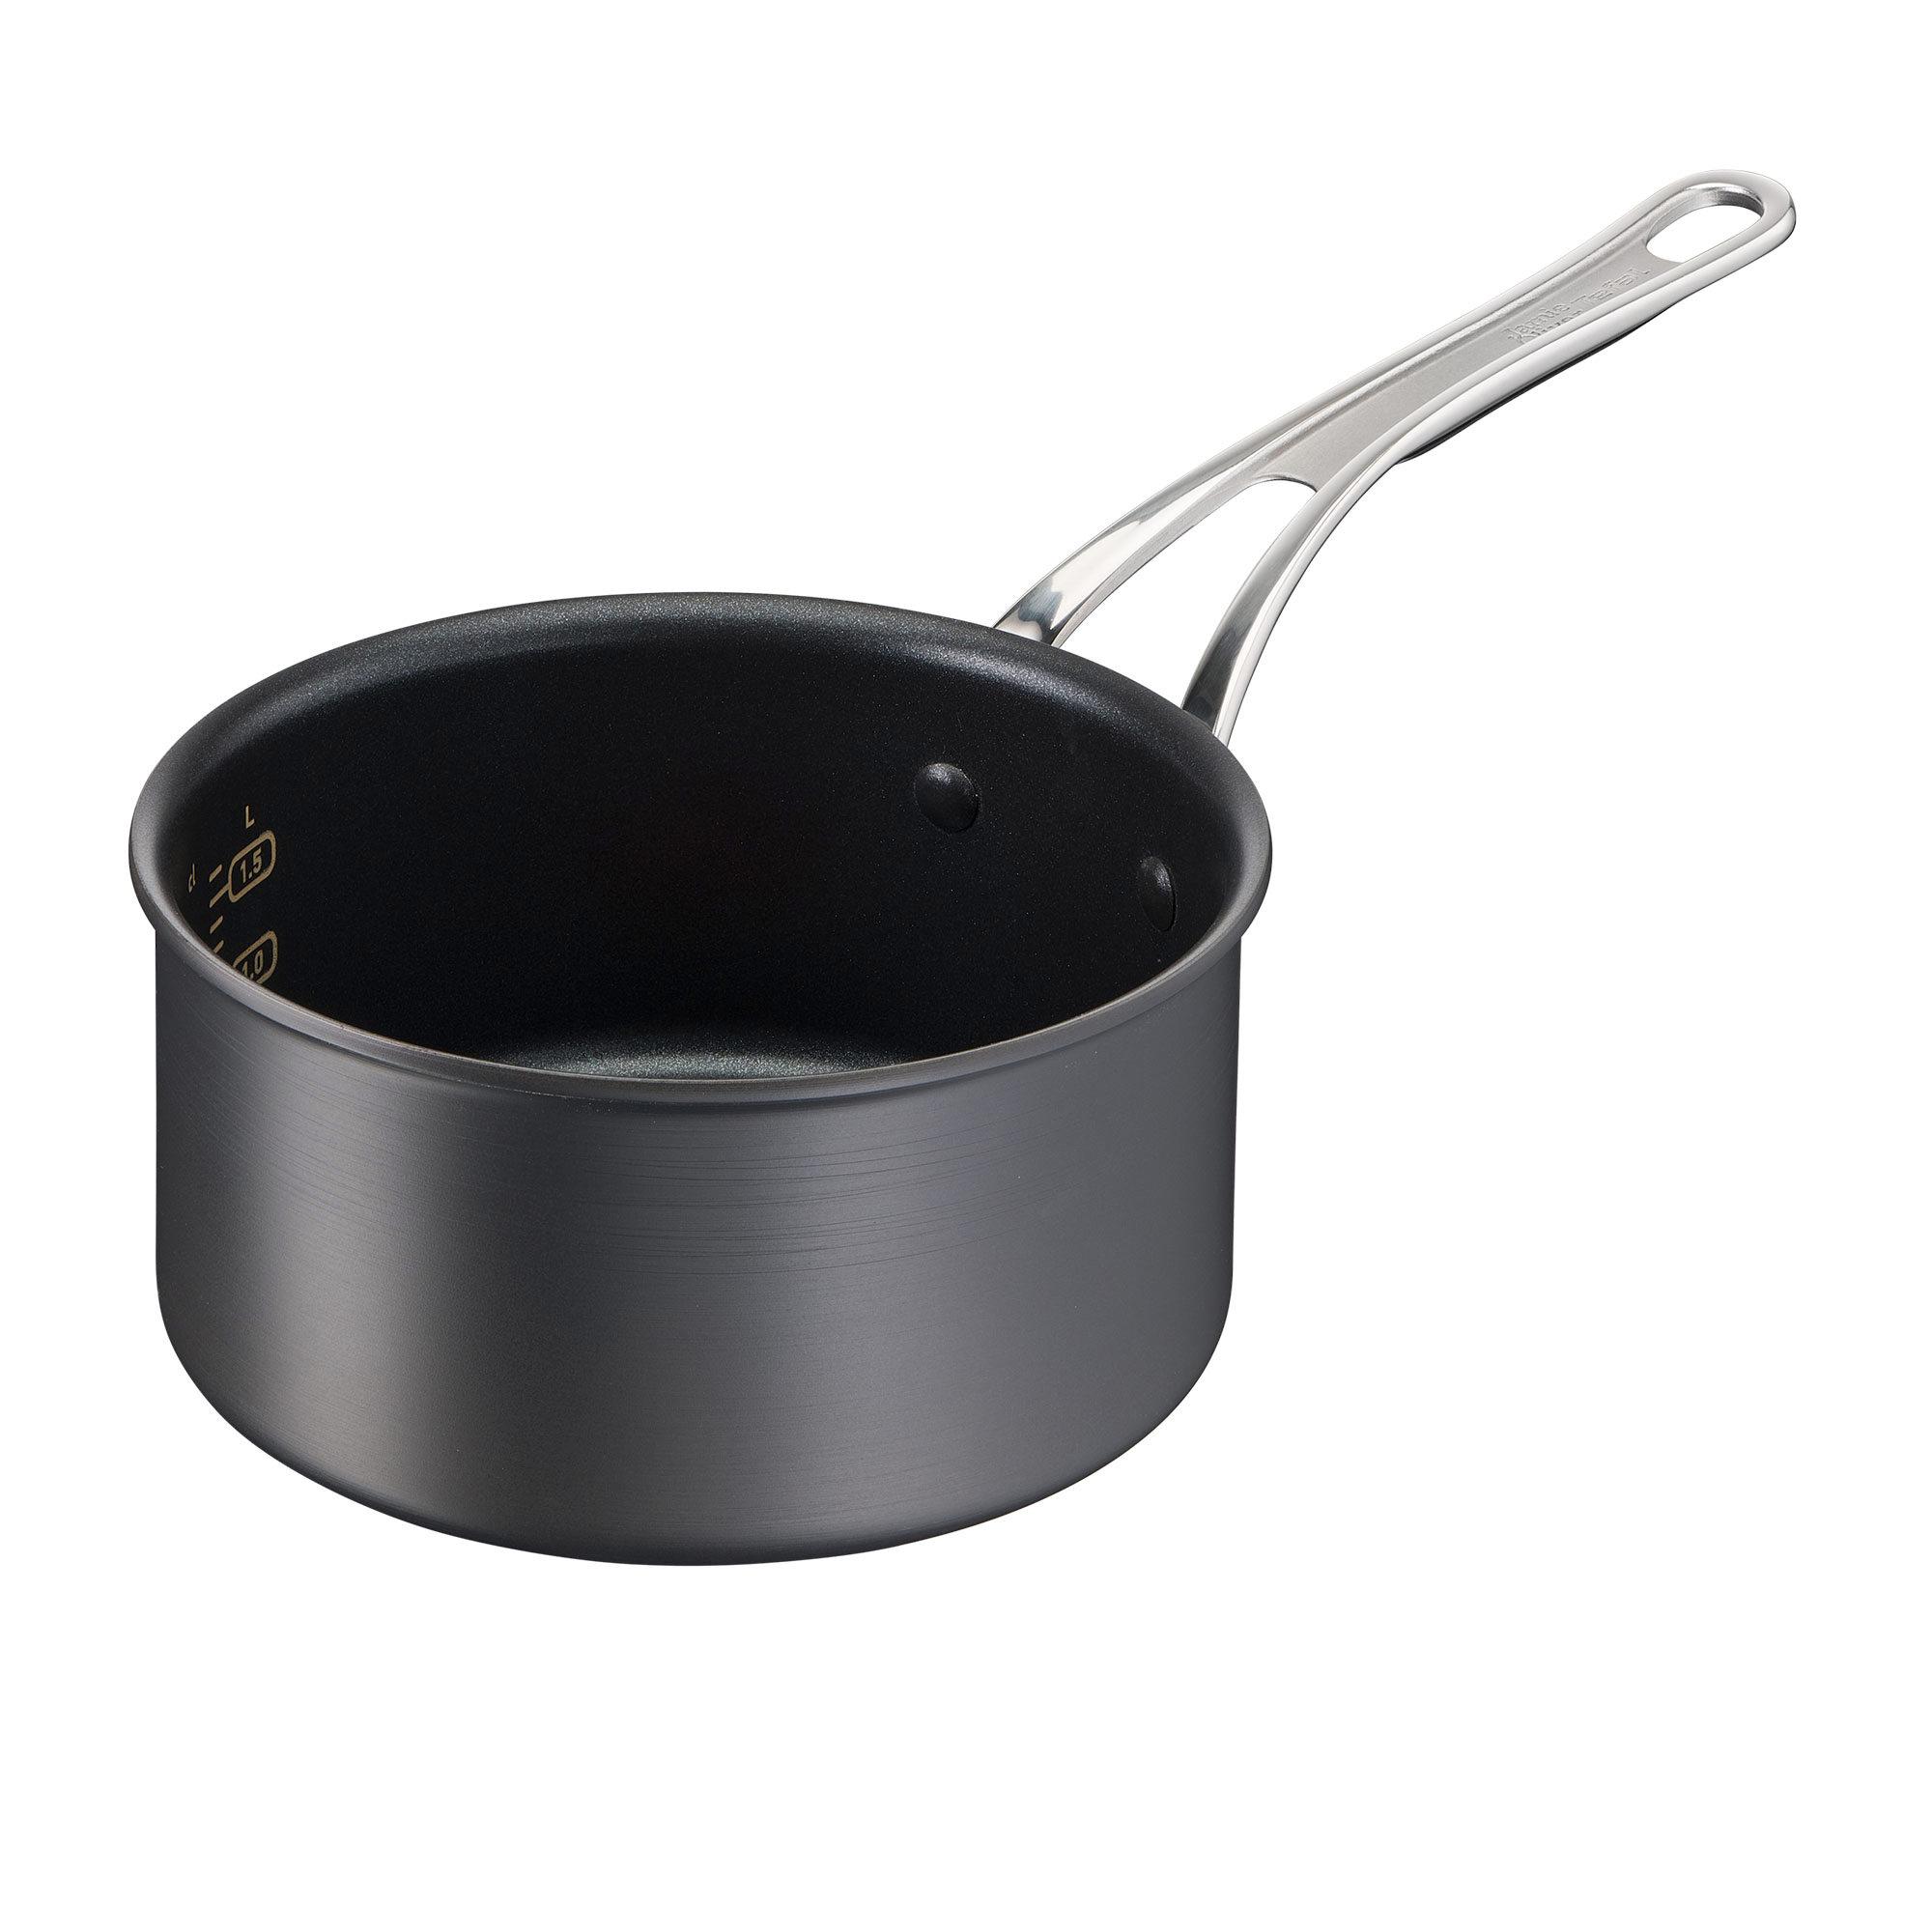 Jamie Oliver by Tefal Cook's Classic Non Stick Induction Saucepan 18cm - 2.2L Image 2